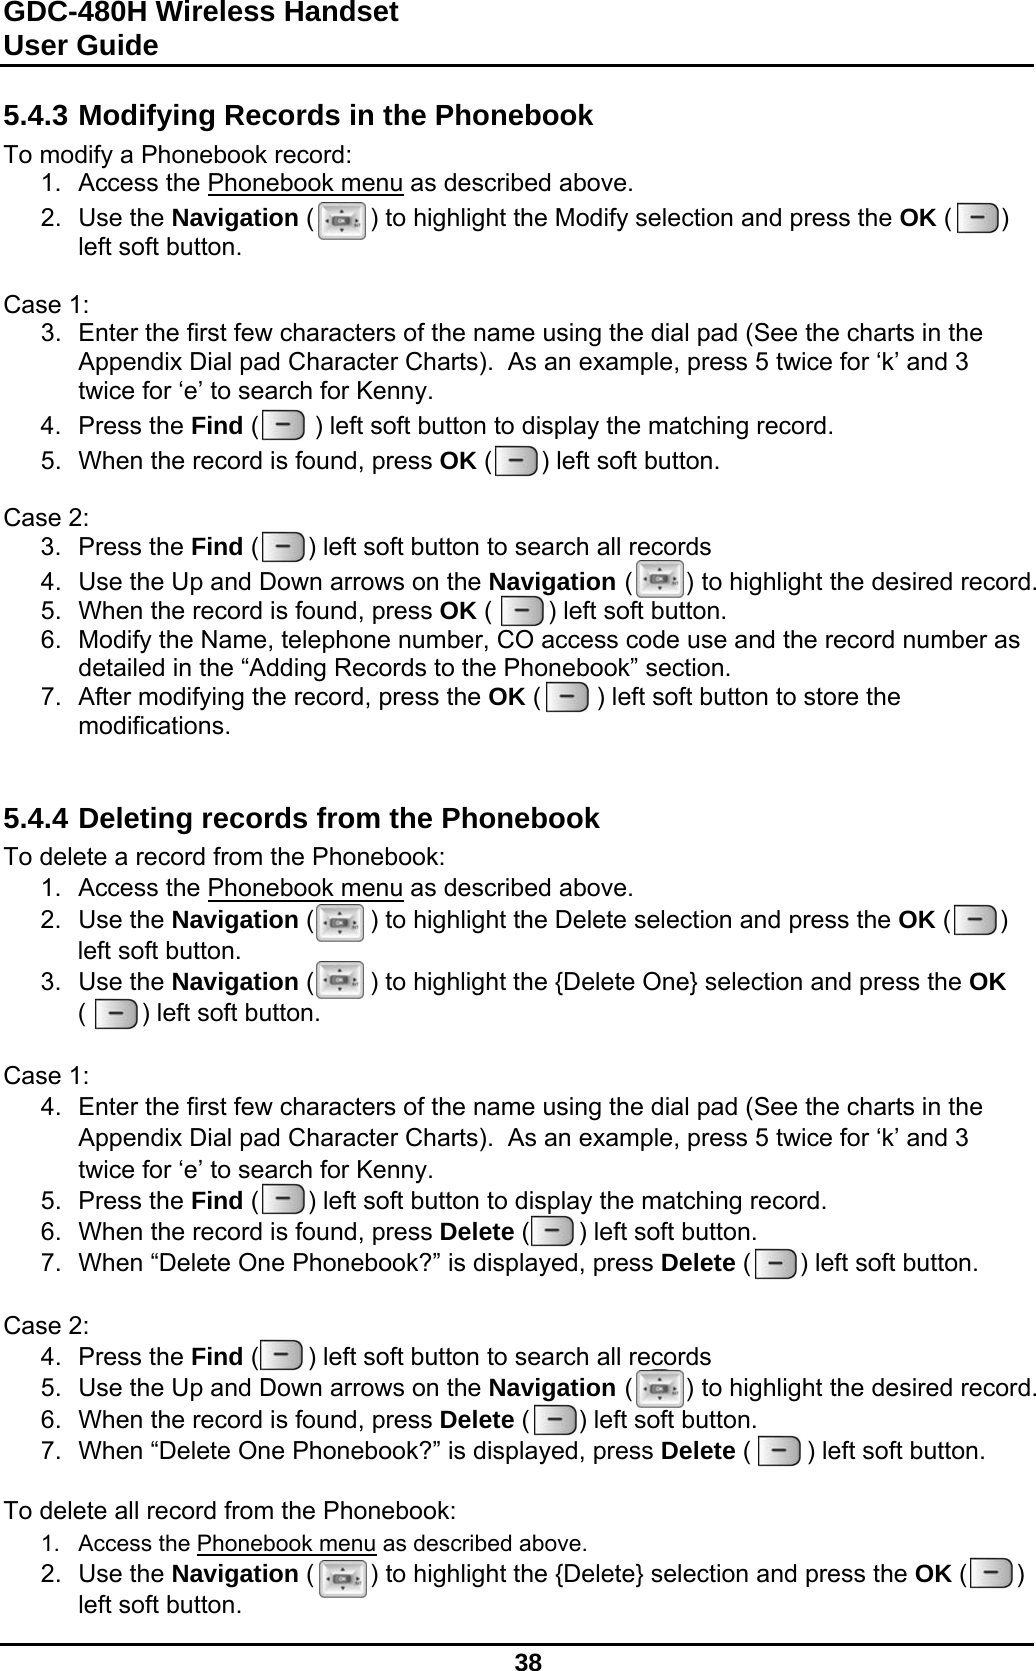 GDC-480H Wireless Handset User Guide   38  5.4.3 Modifying Records in the Phonebook To modify a Phonebook record: 1.  Access the Phonebook menu as described above. 2. Use the Navigation (        ) to highlight the Modify selection and press the OK (       ) left soft button.  Case 1: 3.  Enter the first few characters of the name using the dial pad (See the charts in the Appendix Dial pad Character Charts).  As an example, press 5 twice for ‘k’ and 3 twice for ‘e’ to search for Kenny. 4. Press the Find (        ) left soft button to display the matching record. 5.  When the record is found, press OK (       ) left soft button.  Case 2: 3. Press the Find (       ) left soft button to search all records 4.  Use the Up and Down arrows on the Navigation (       ) to highlight the desired record. 5.  When the record is found, press OK (        ) left soft button. 6.  Modify the Name, telephone number, CO access code use and the record number as detailed in the “Adding Records to the Phonebook” section. 7.  After modifying the record, press the OK (        ) left soft button to store the modifications.   5.4.4 Deleting records from the Phonebook To delete a record from the Phonebook: 1.  Access the Phonebook menu as described above. 2. Use the Navigation (        ) to highlight the Delete selection and press the OK (       ) left soft button. 3. Use the Navigation (        ) to highlight the {Delete One} selection and press the OK (        ) left soft button.  Case 1: 4.  Enter the first few characters of the name using the dial pad (See the charts in the Appendix Dial pad Character Charts).  As an example, press 5 twice for ‘k’ and 3 twice for ‘e’ to search for Kenny. 5. Press the Find (       ) left soft button to display the matching record. 6.  When the record is found, press Delete (       ) left soft button. 7.  When “Delete One Phonebook?” is displayed, press Delete (       ) left soft button.  Case 2: 4. Press the Find (       ) left soft button to search all records 5.  Use the Up and Down arrows on the Navigation (       ) to highlight the desired record. 6.  When the record is found, press Delete (       ) left soft button. 7.  When “Delete One Phonebook?” is displayed, press Delete (        ) left soft button.  To delete all record from the Phonebook: 1.  Access the Phonebook menu as described above. 2. Use the Navigation (        ) to highlight the {Delete} selection and press the OK (       ) left soft button. 